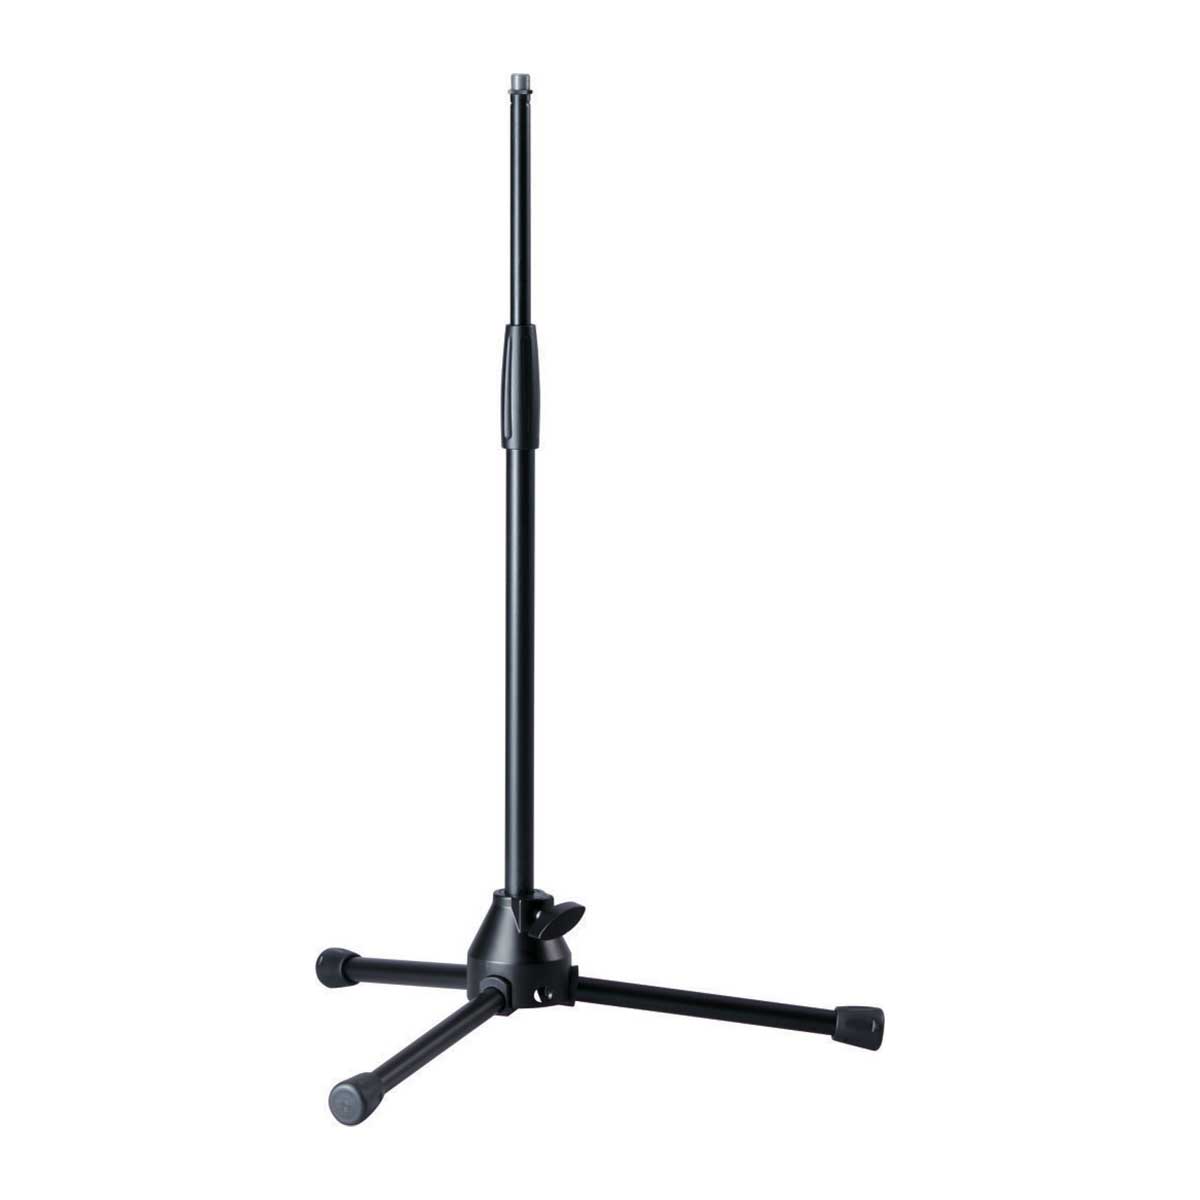 Precision by Triad Orbit ST Short type straight microphone stand